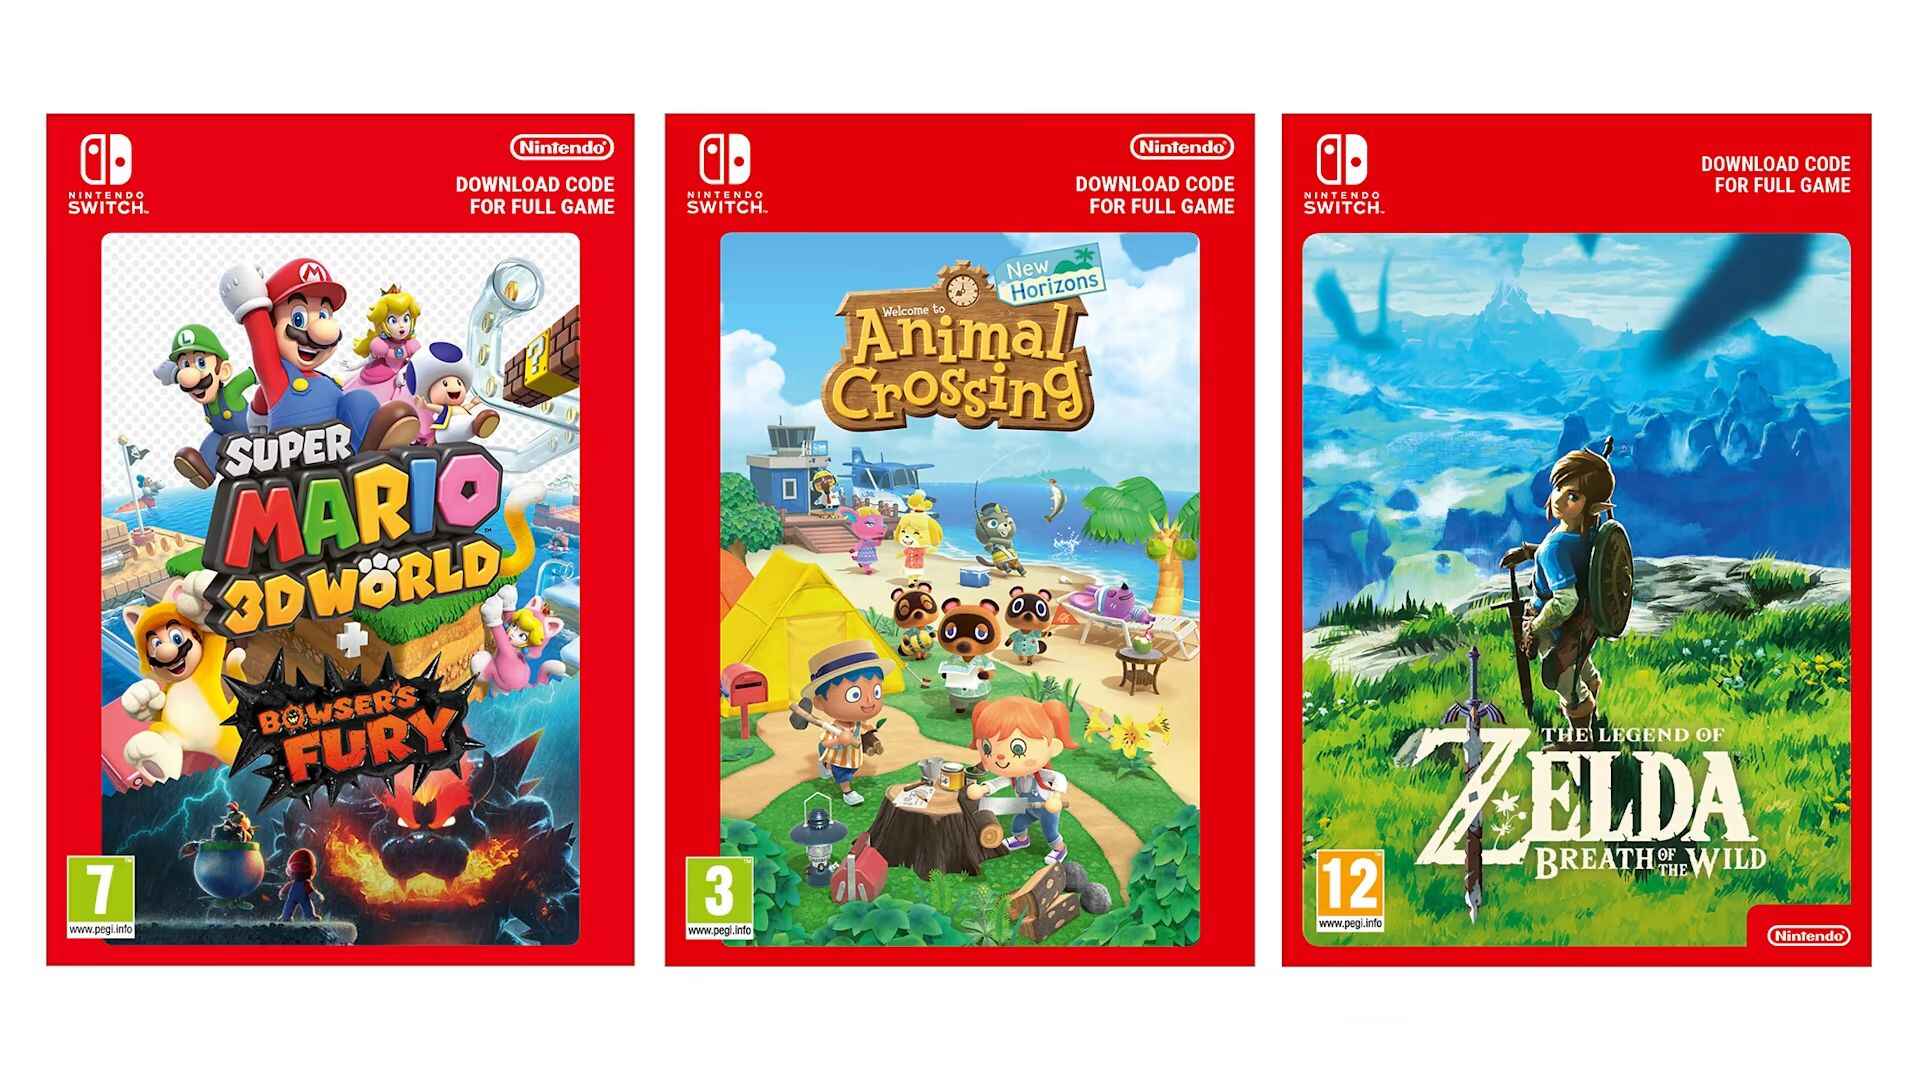 How Long Does It Take To Download Switch Games